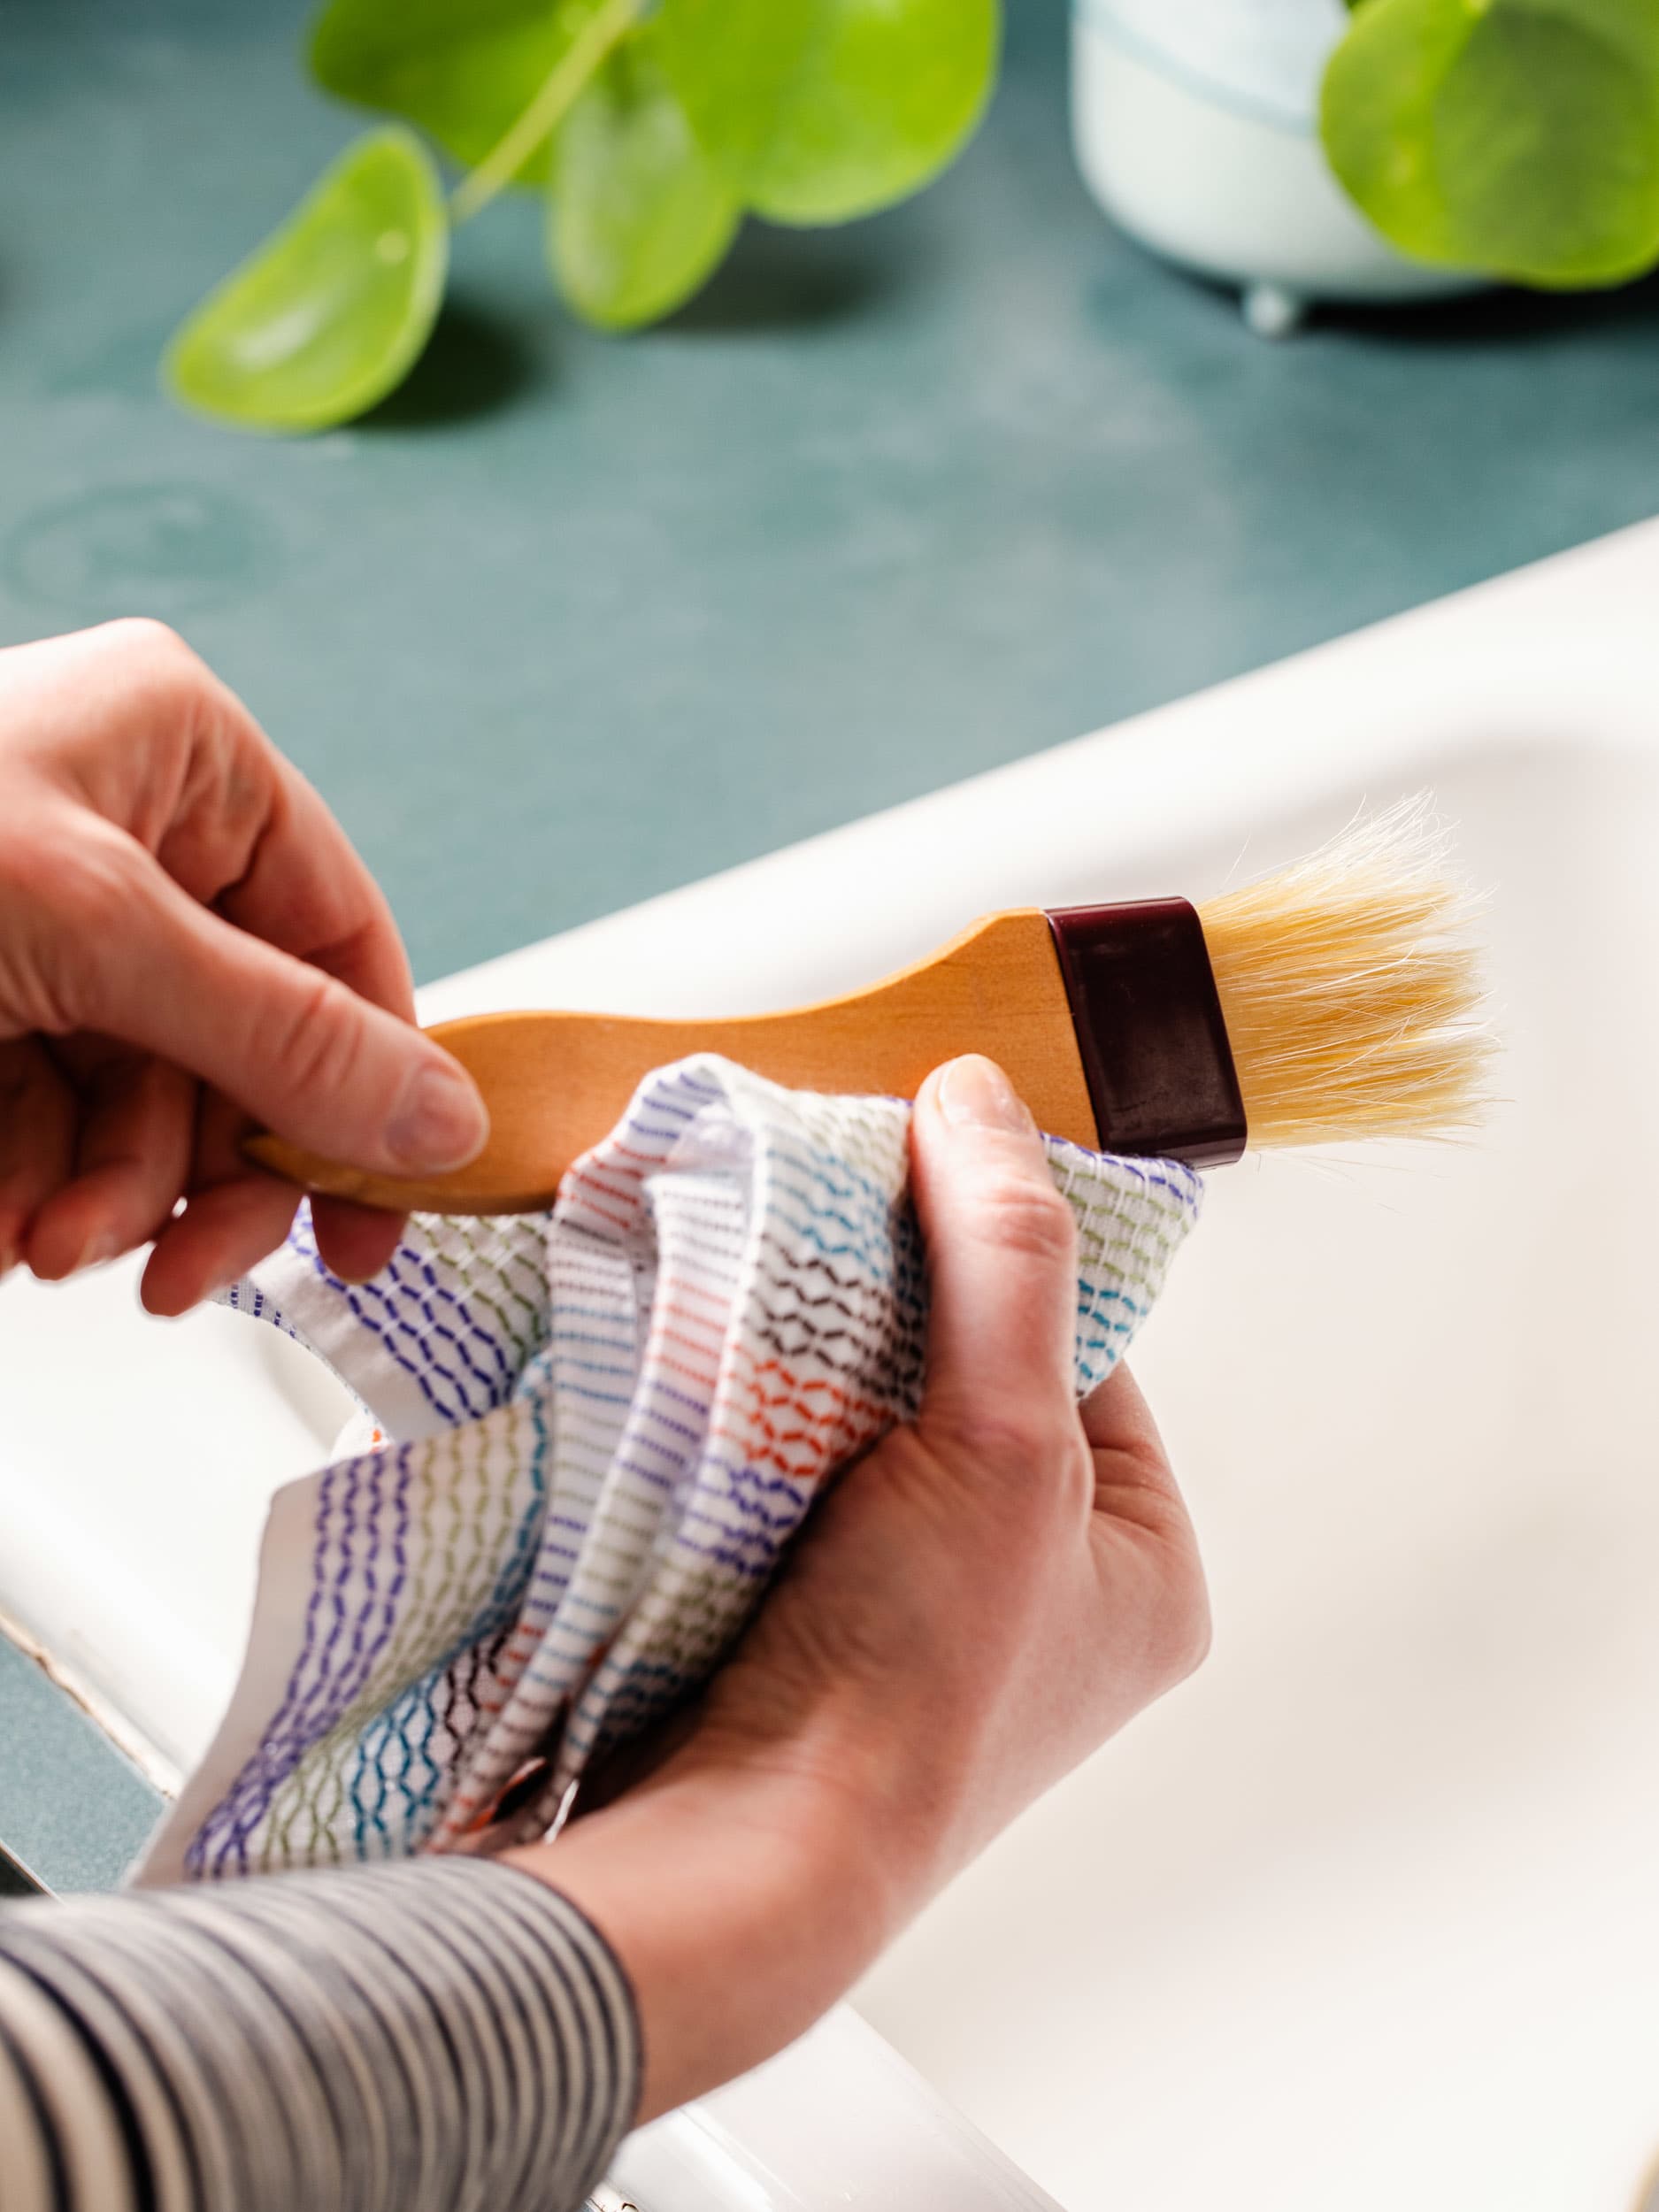 How To Clean a Sticky Pastry Brush